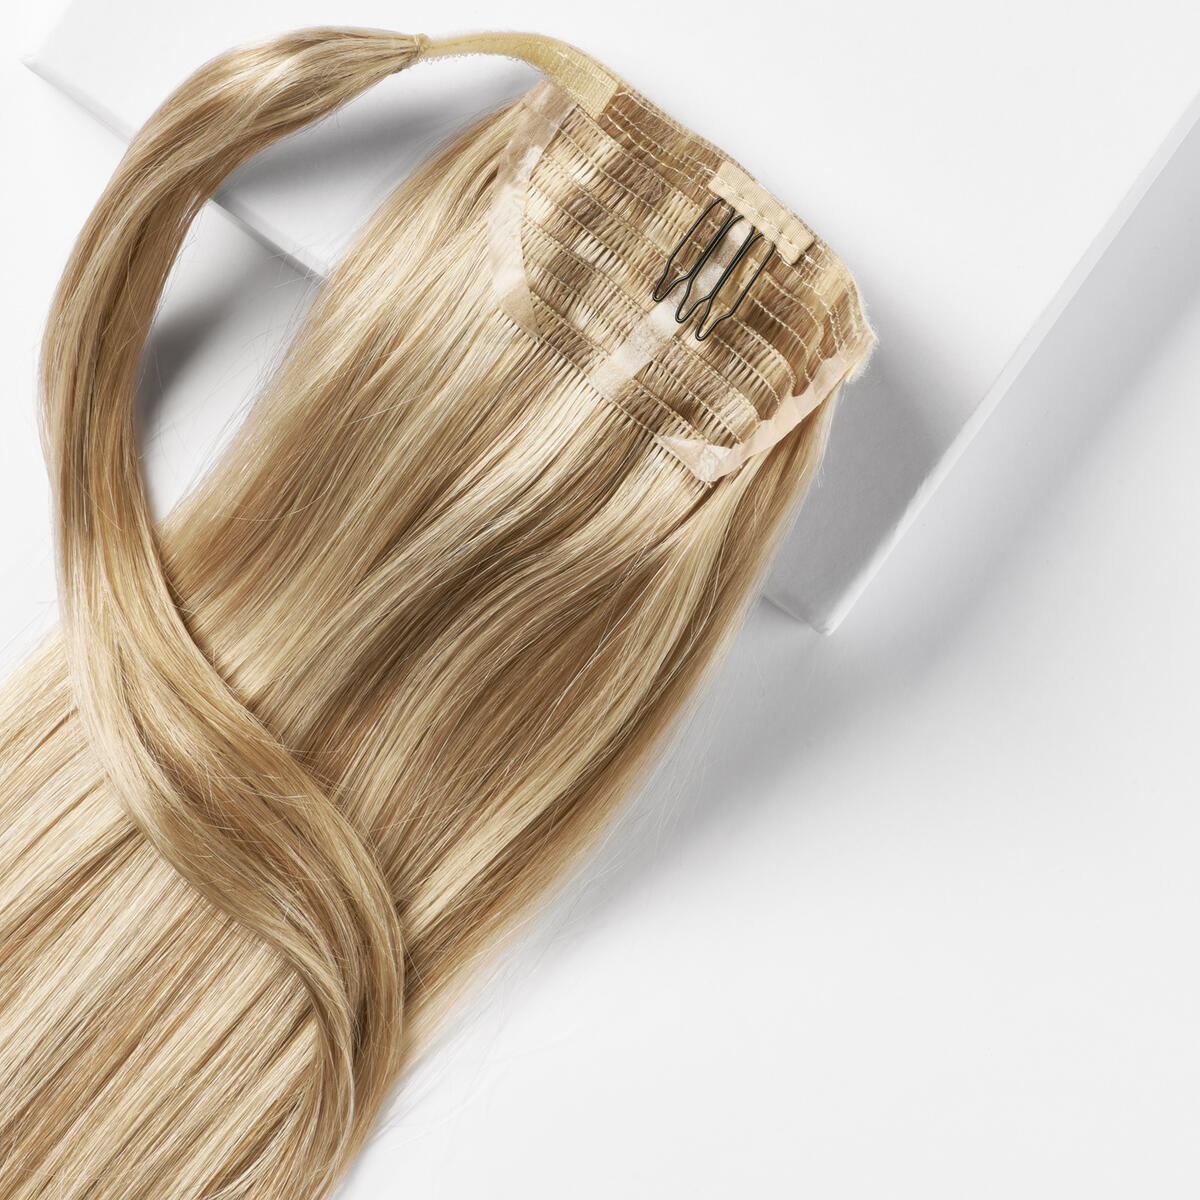 Sleek Clip-in Ponytail Made of real hair M7.3/10.8 Cendre Ash Blonde Mix 50 cm